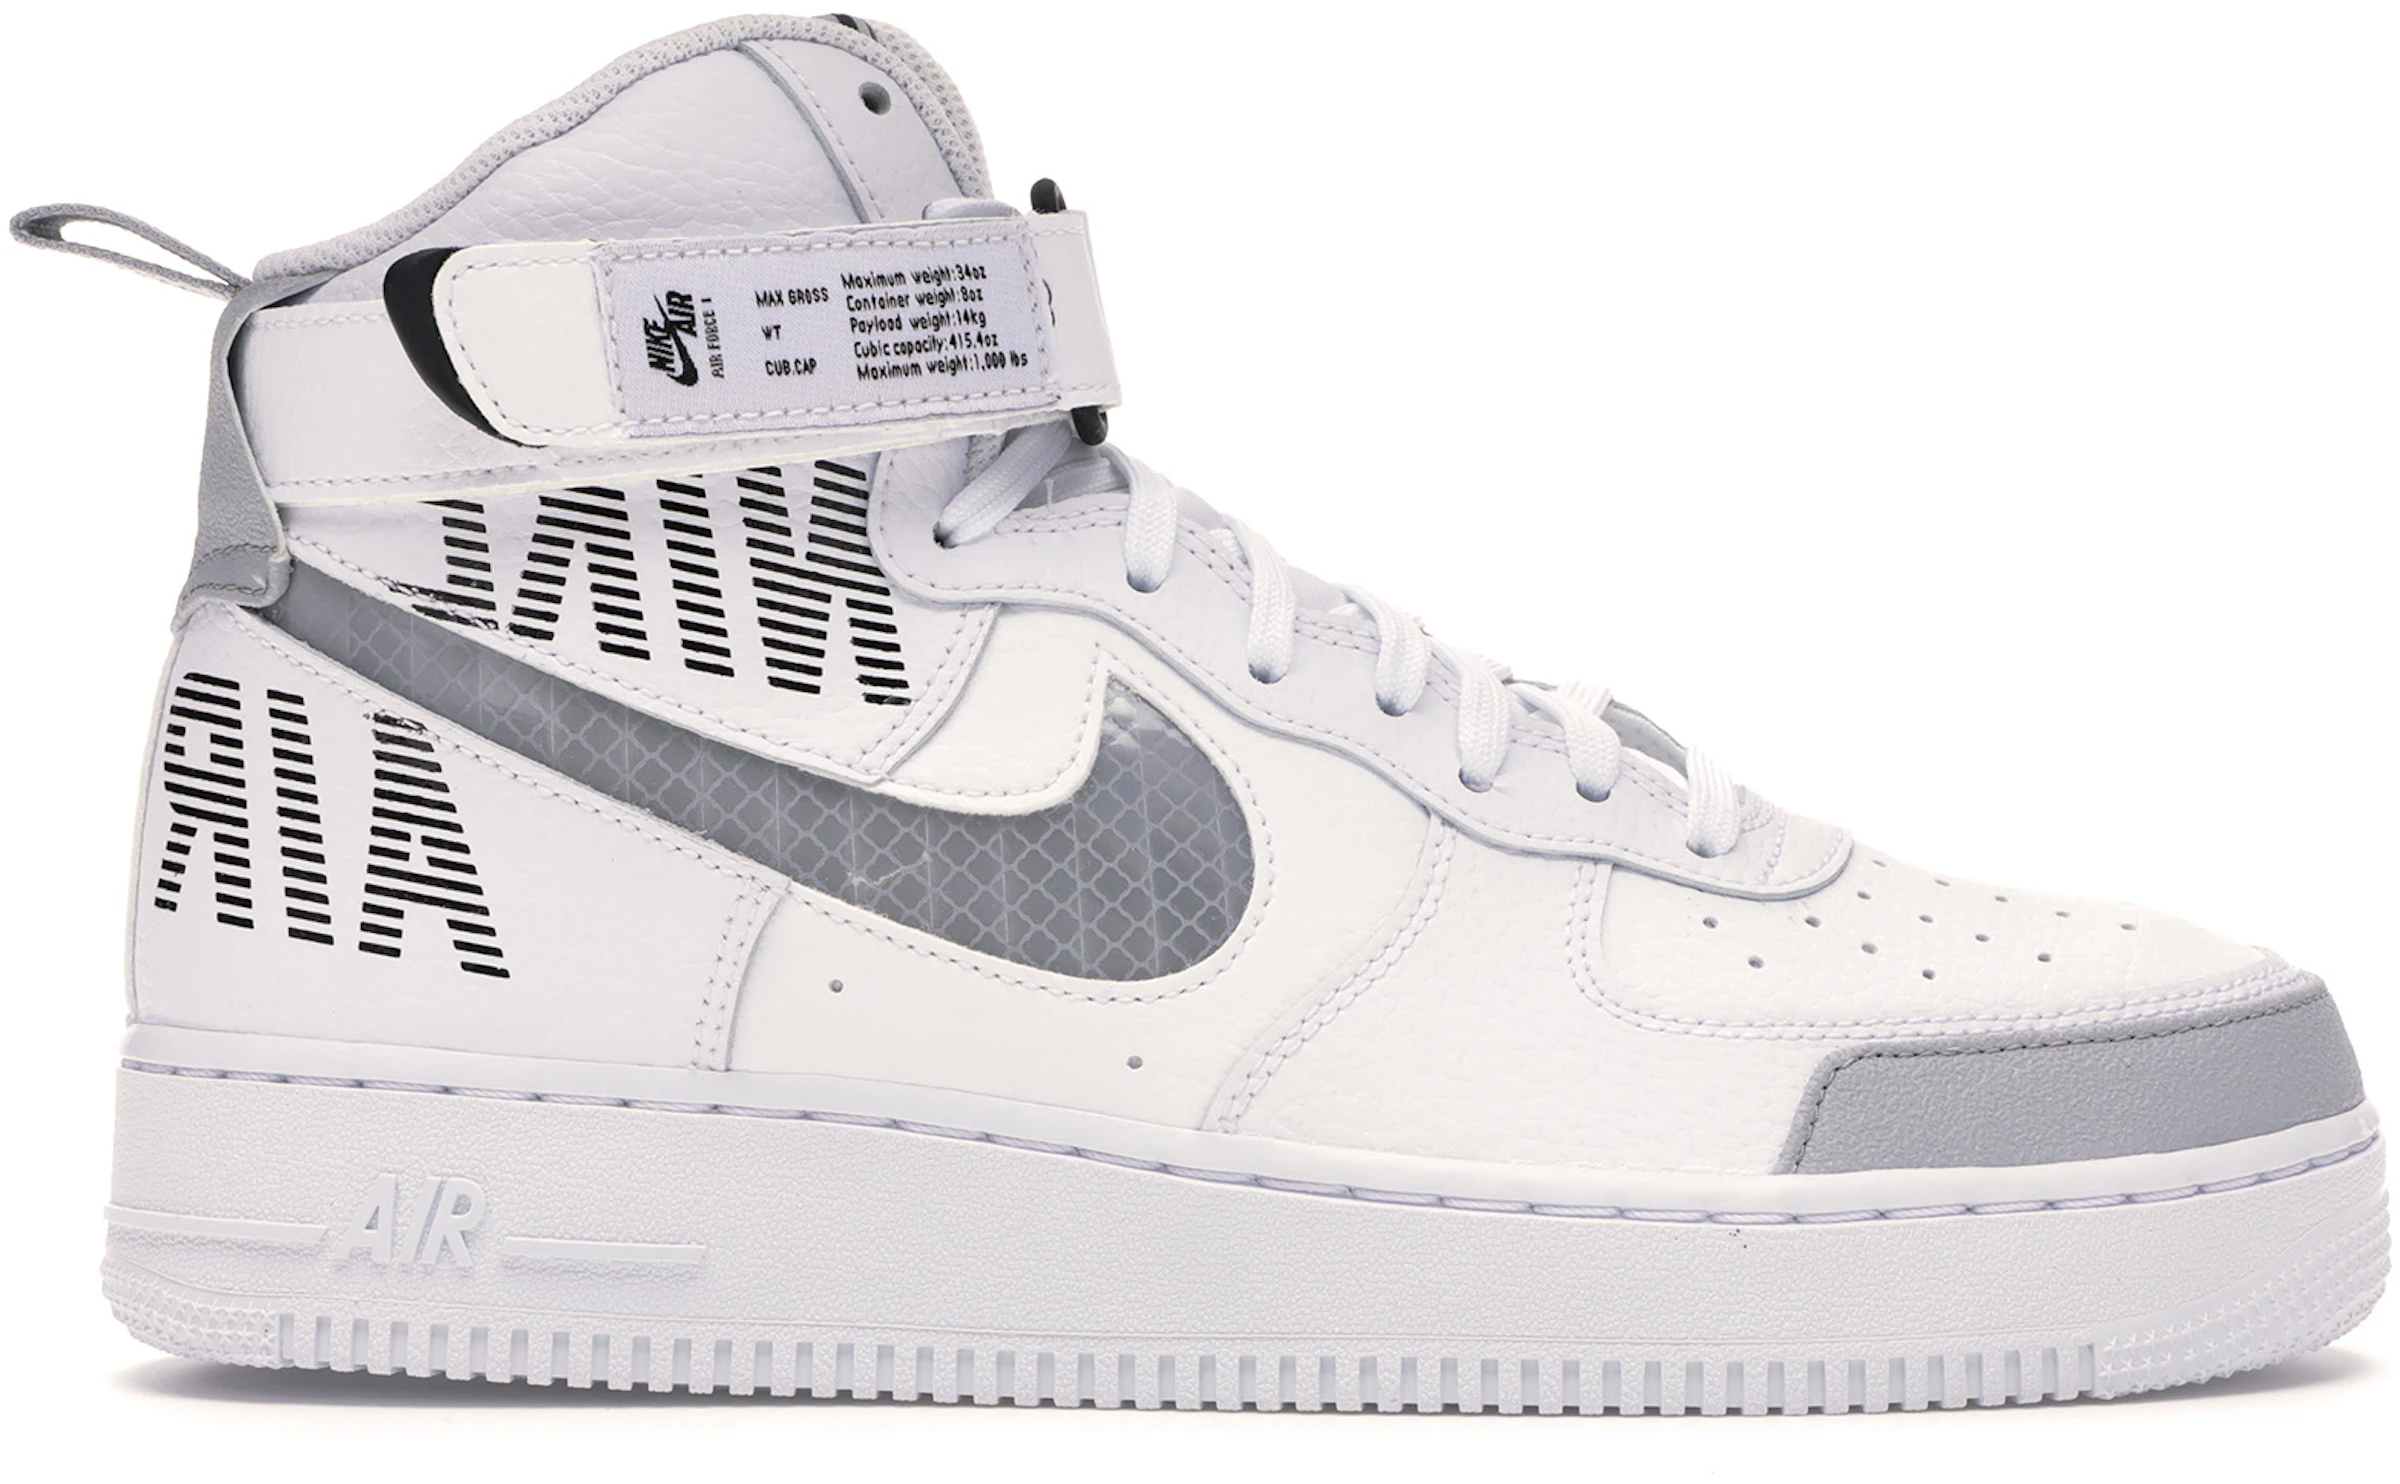 Baars schending Toegepast Nike Air Force 1 High Under Construction White - CQ0449-100 - US